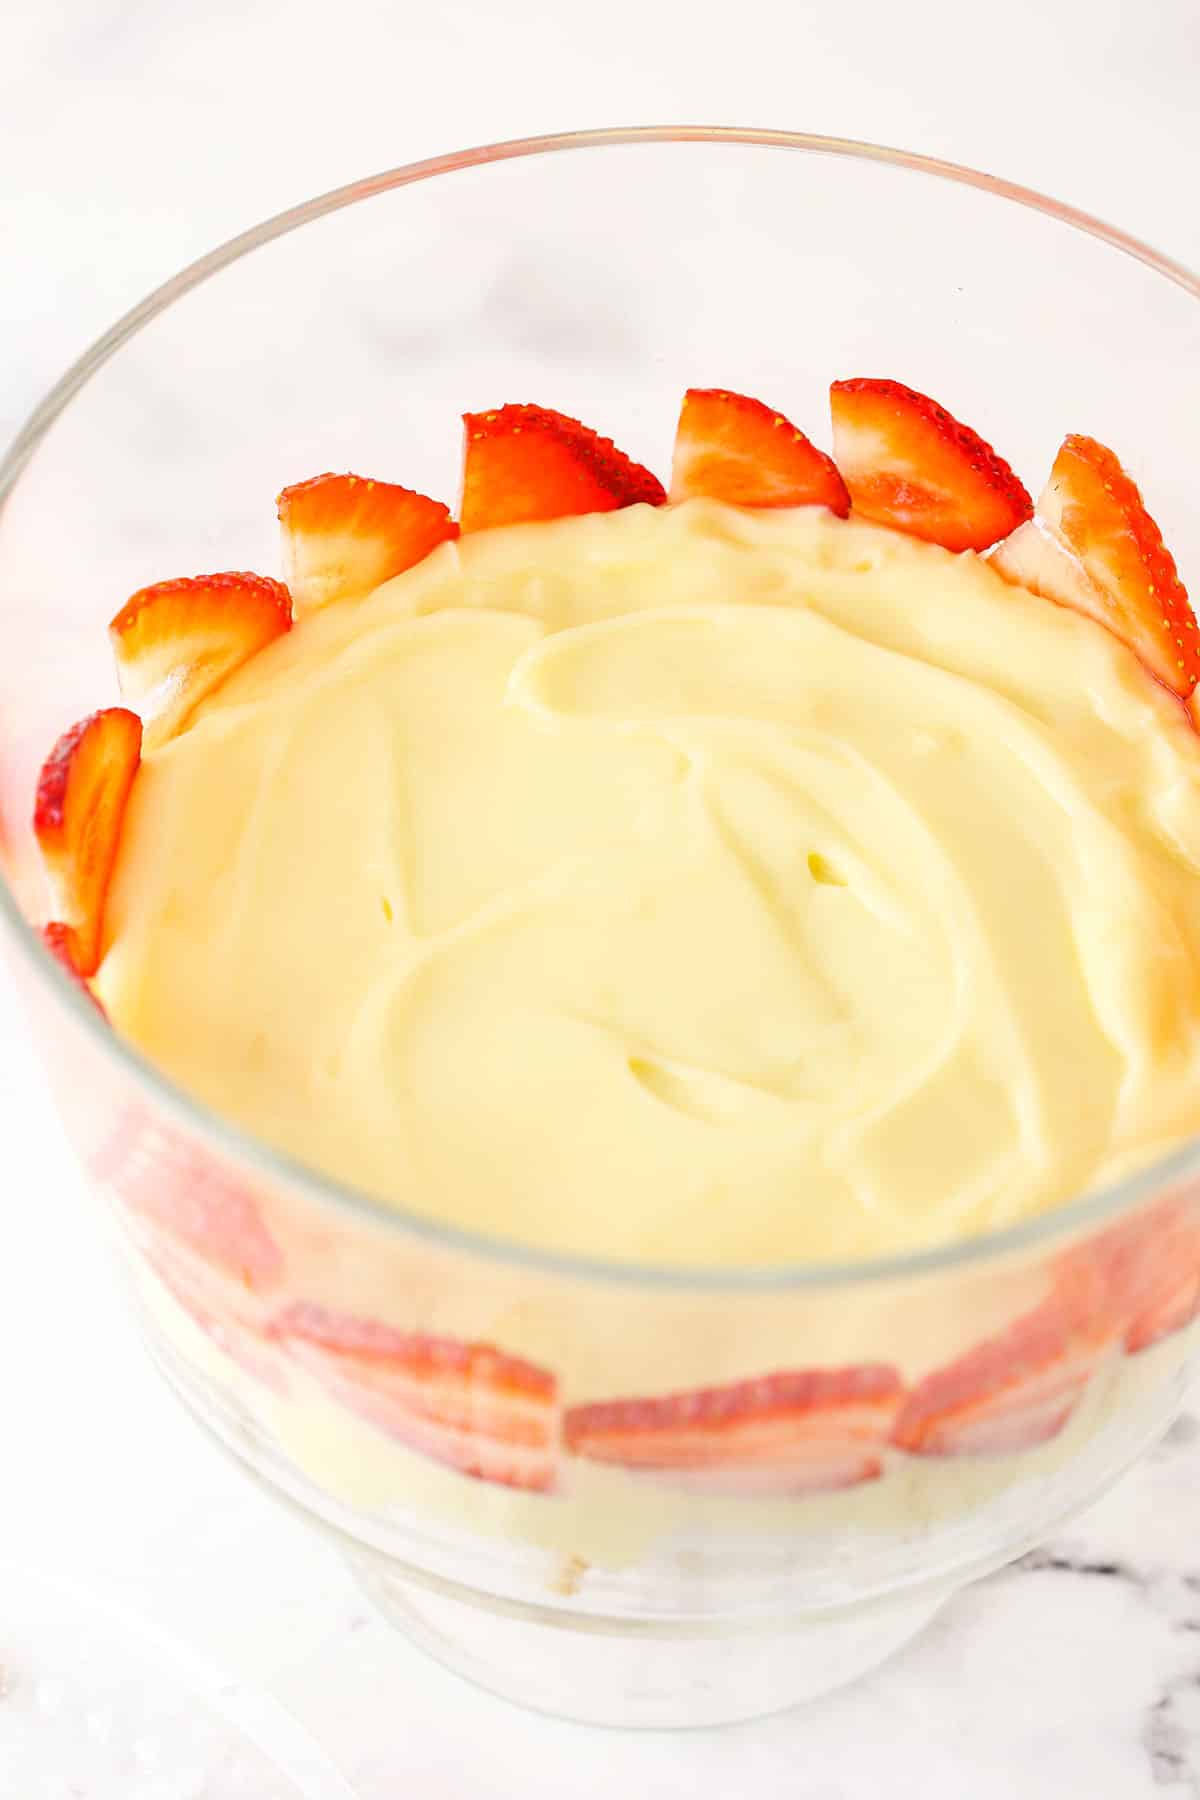 Overhead view of strawberries being added on top of trifle pudding layer.